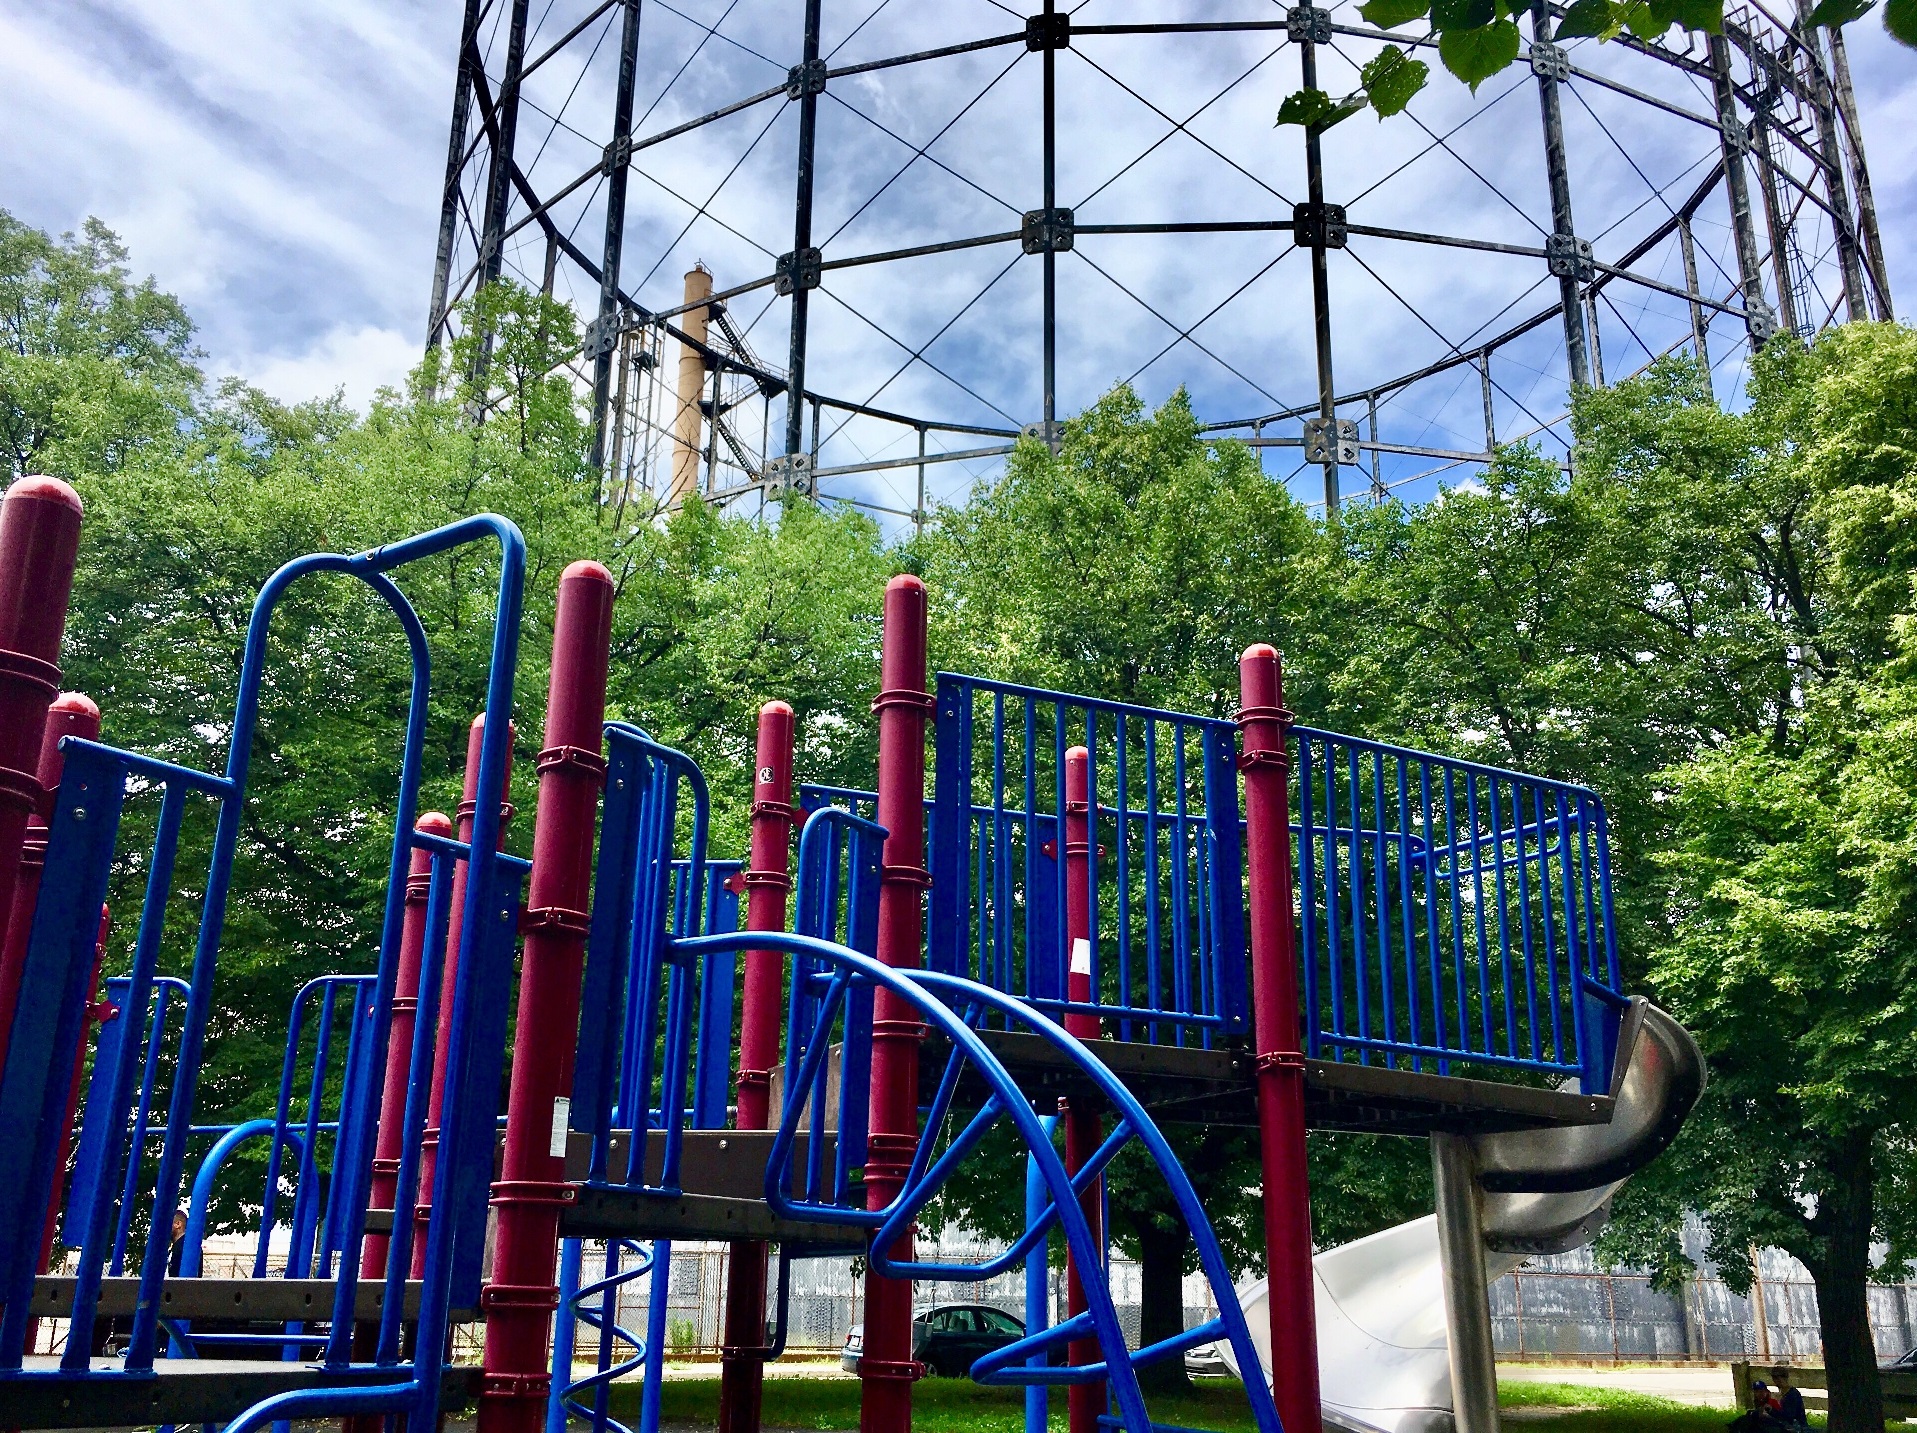 PES refinery looms over a playground in Philadelphia